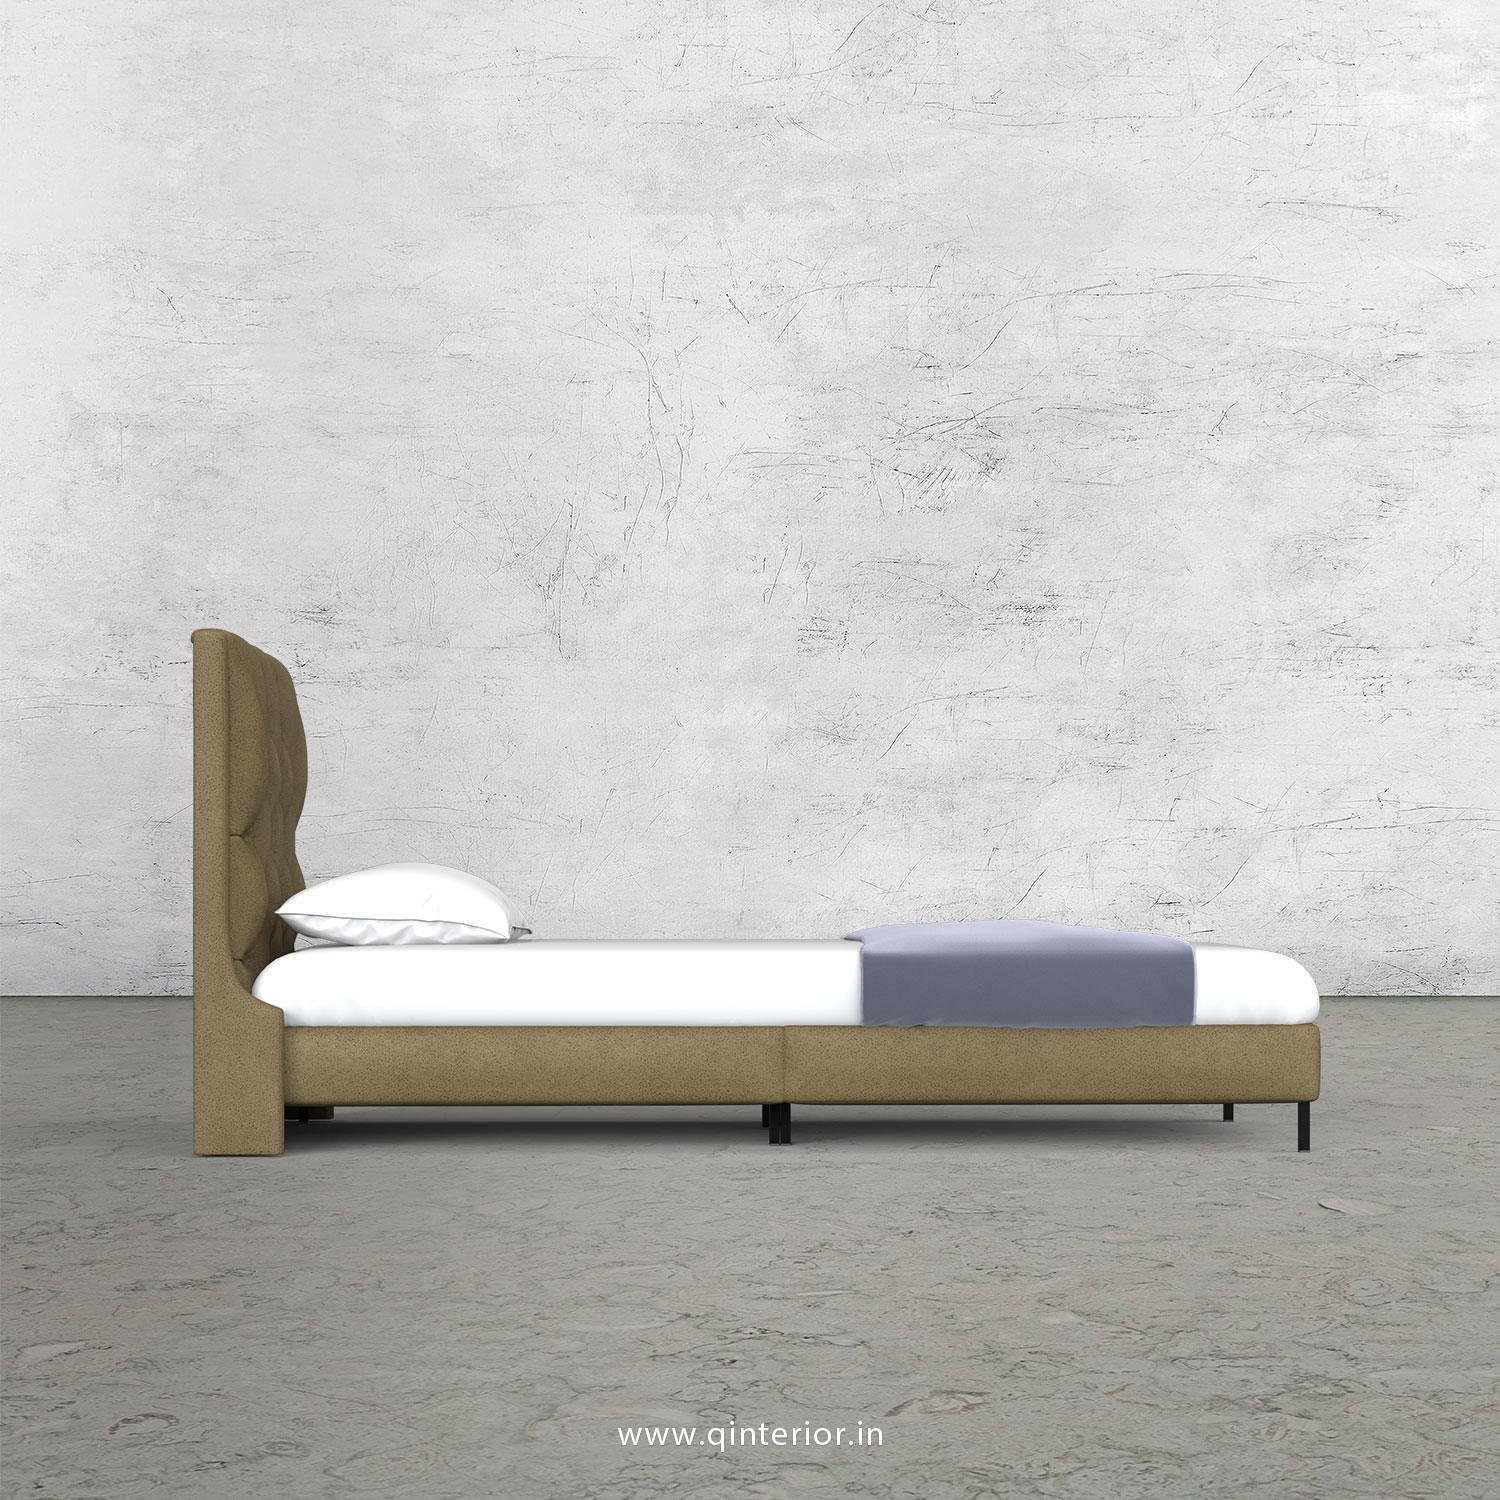 Scorpius Single Bed in Fab Leather – SBD003 FL01